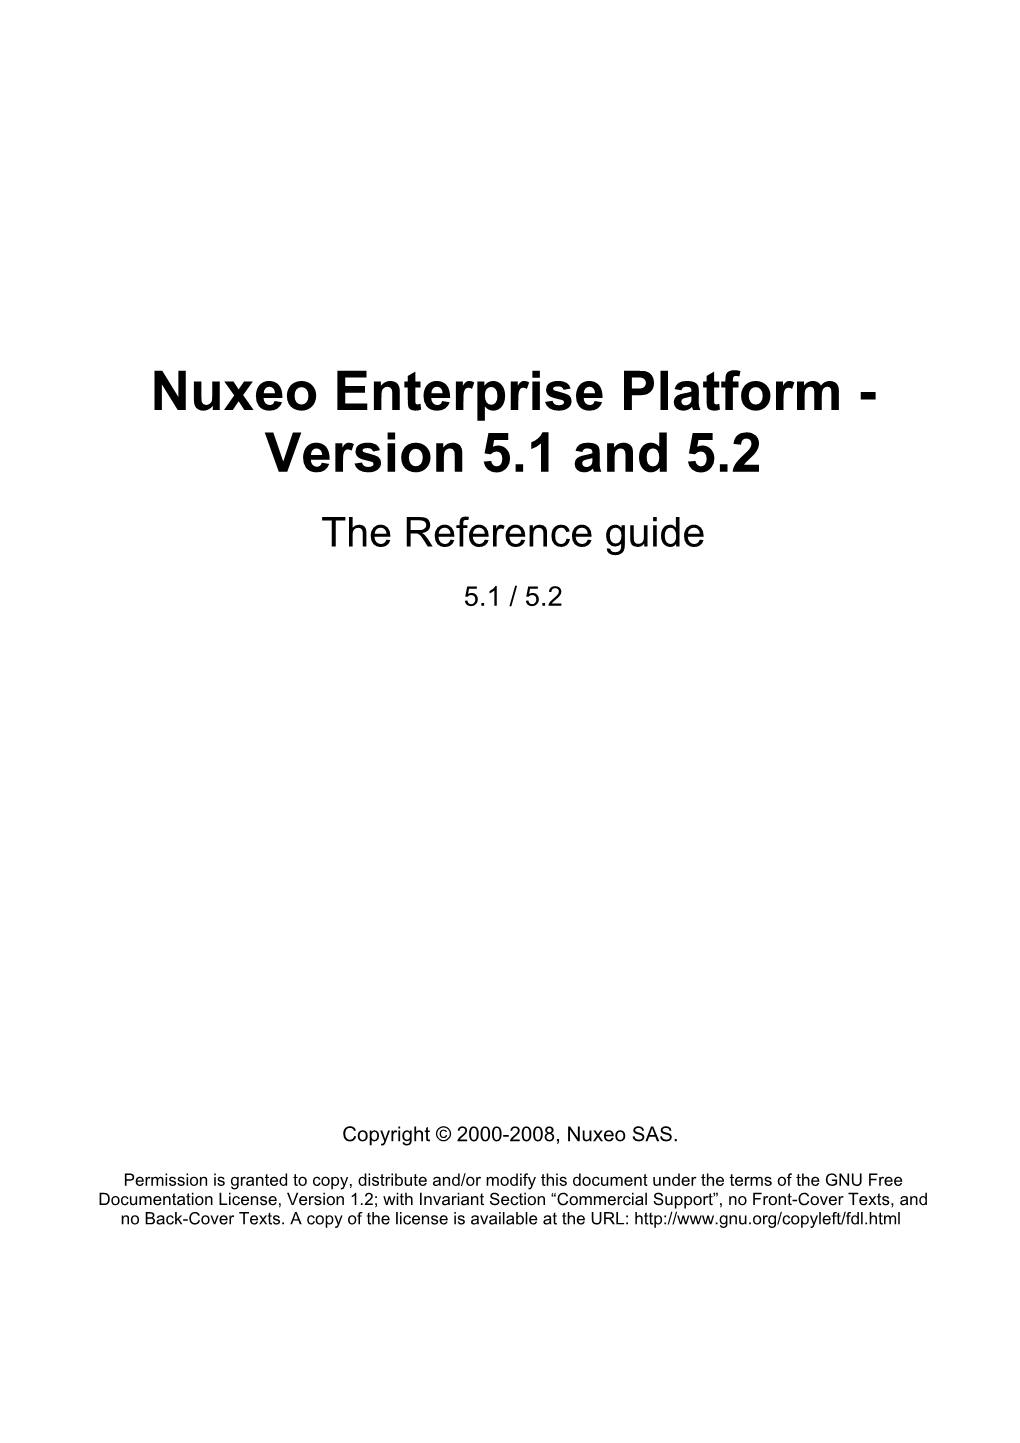 Nuxeo Enterprise Platform - Version 5.1 and 5.2 the Reference Guide